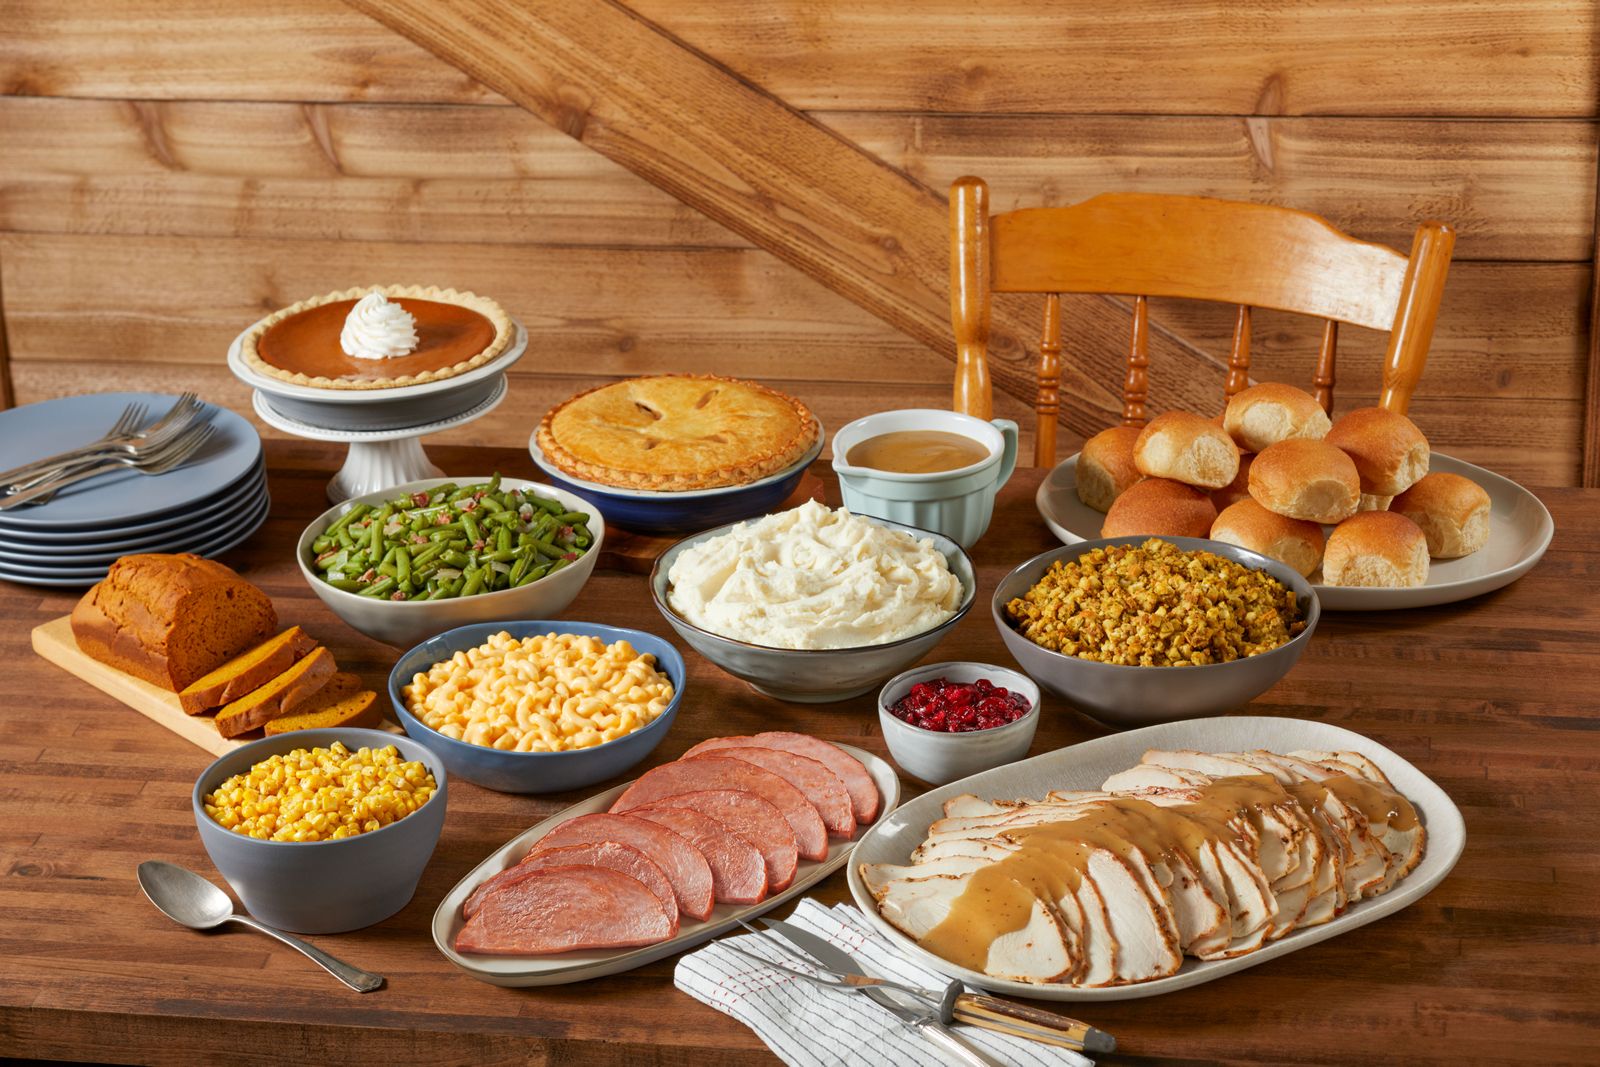 Bob Evans Restaurants' Signature Thanksgiving Offerings Are Back, Providing a Wide Variety of Holiday Meal Solutions